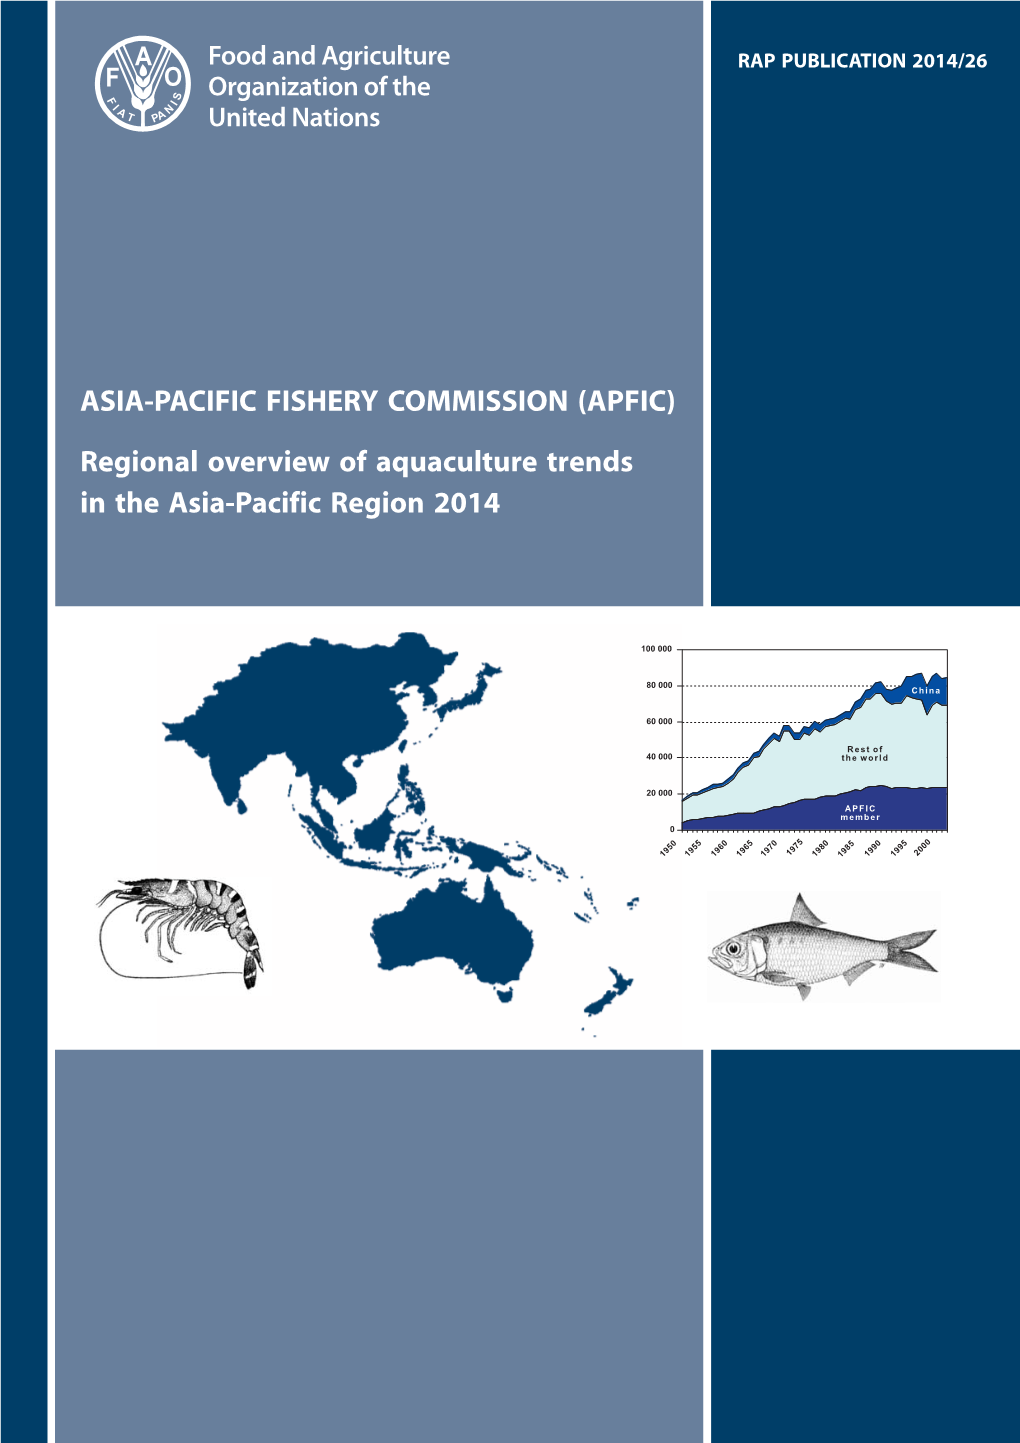 Regional Overview of Aquaculture Trends in the Asia-Pacific Region 2014